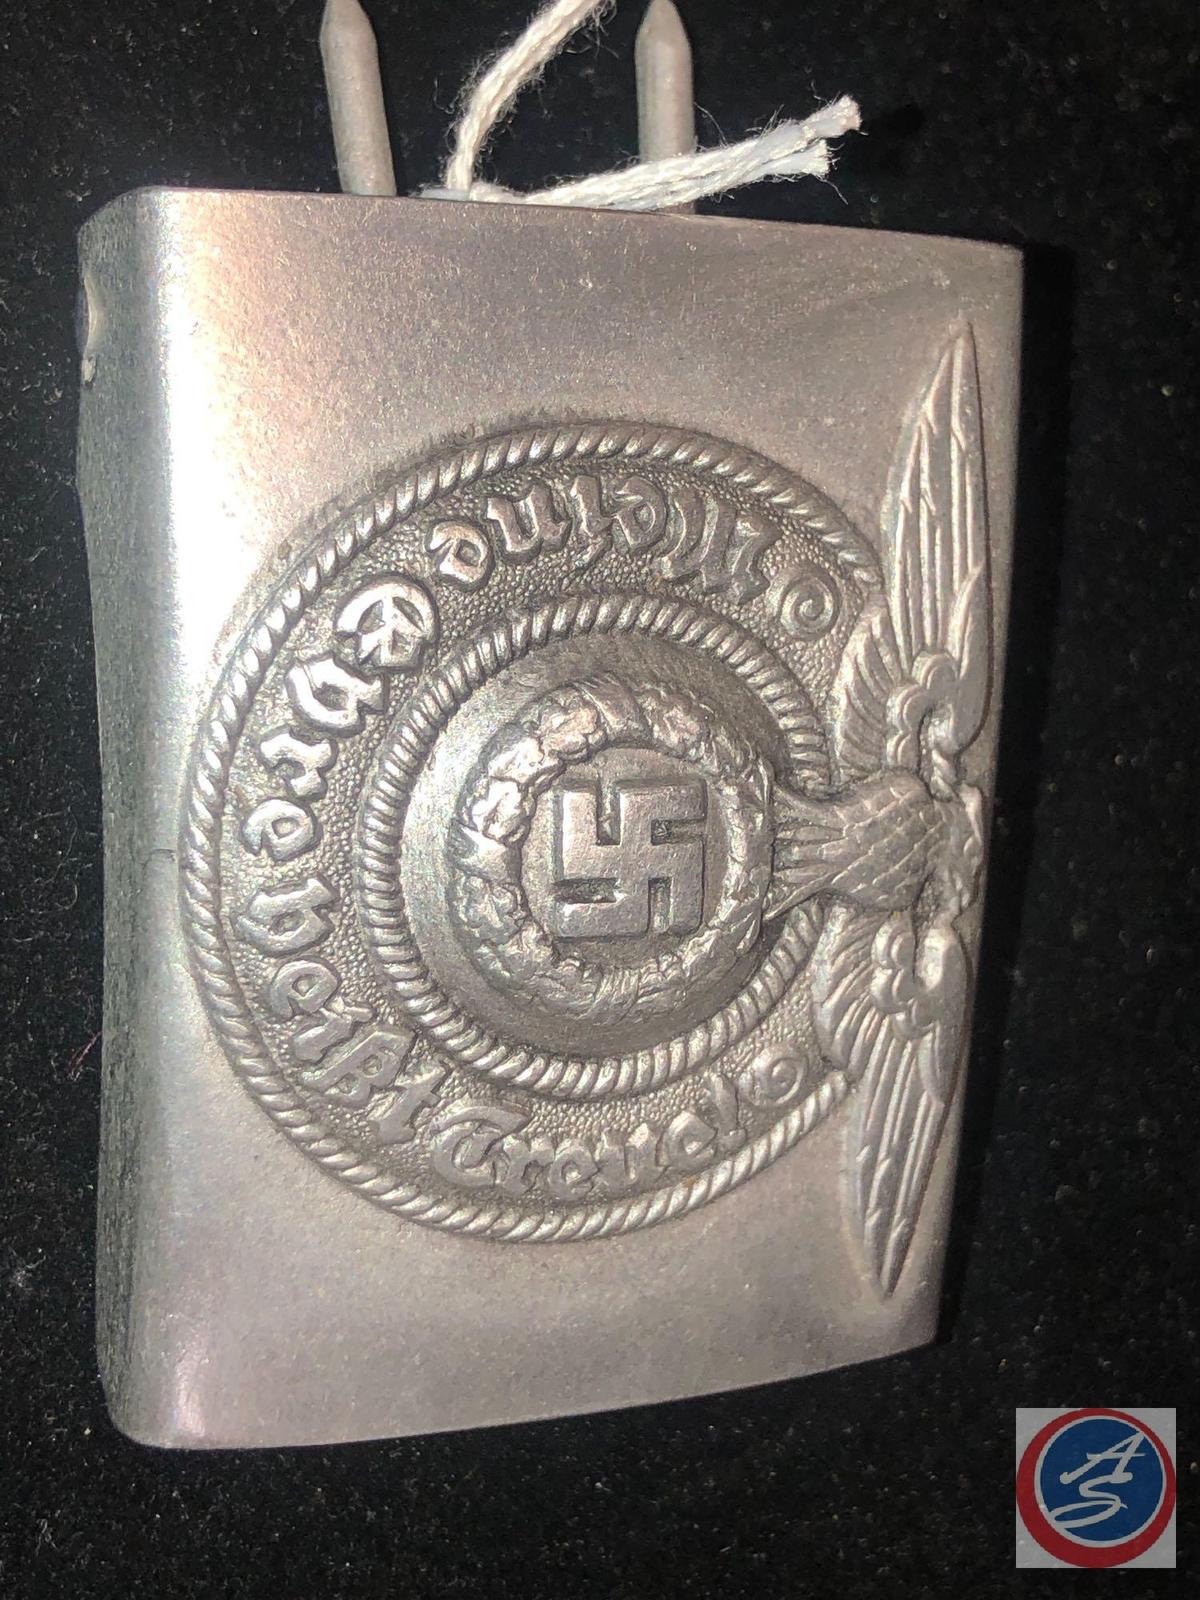 German WWII Waffen SS Enlisted Mans Belt Buckle. The front reads ?Meine Ehre heist Treue!? (My Honor